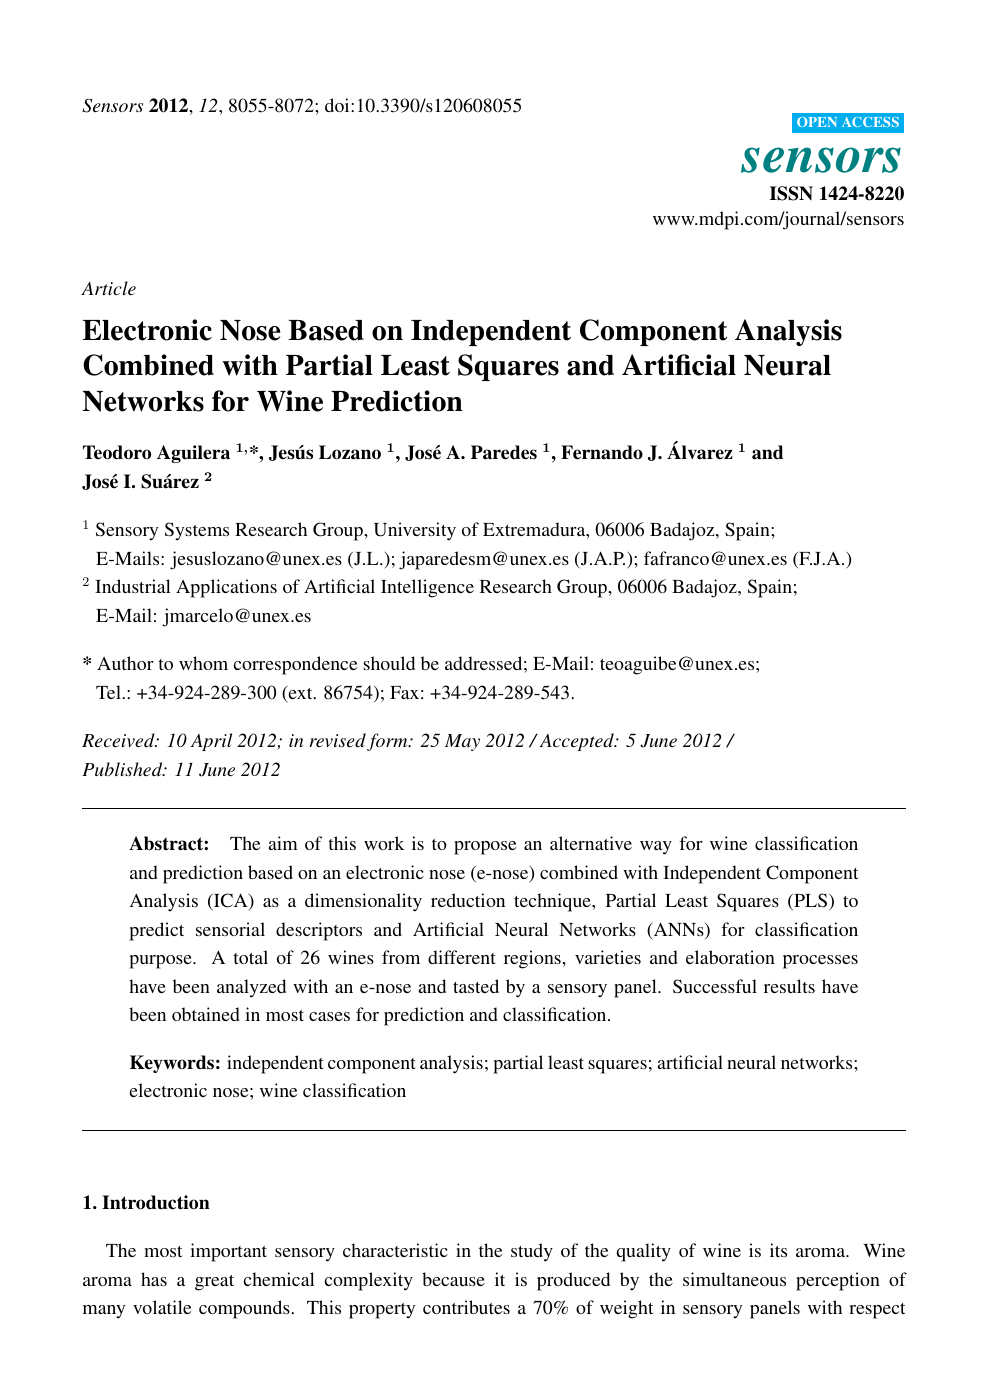 Electronic Nose Based On Independent Component Analysis Combined With Partial Least Squares And Artificial Neural Networks For Wine Prediction Topic Of Research Paper In Medical Engineering Download Scholarly Article Pdf And